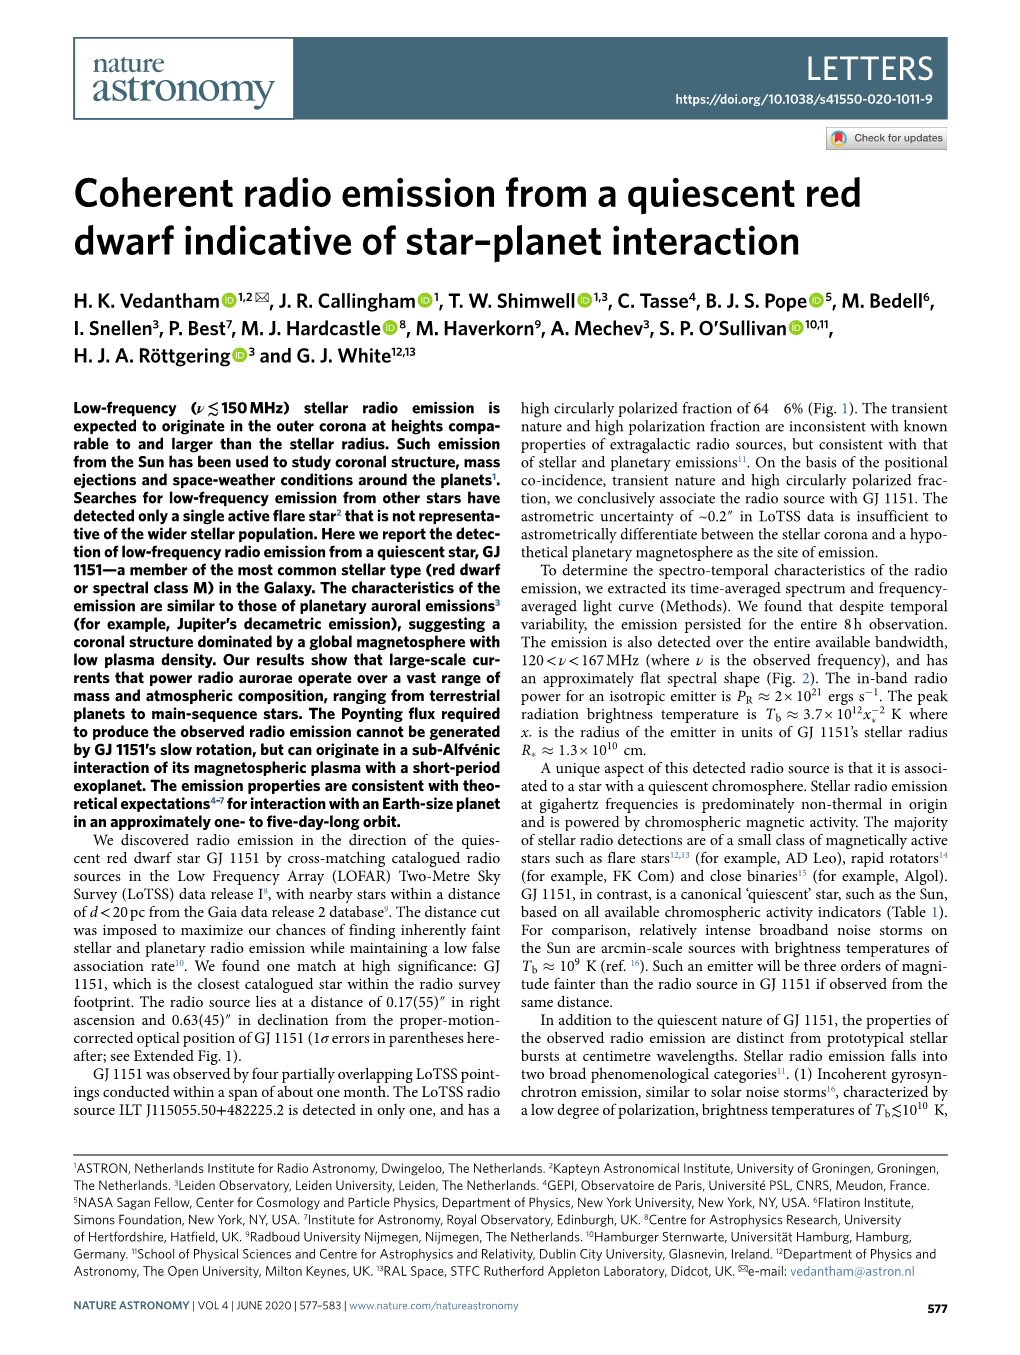 Coherent Radio Emission from a Quiescent Red Dwarf Indicative of Star–Planet Interaction